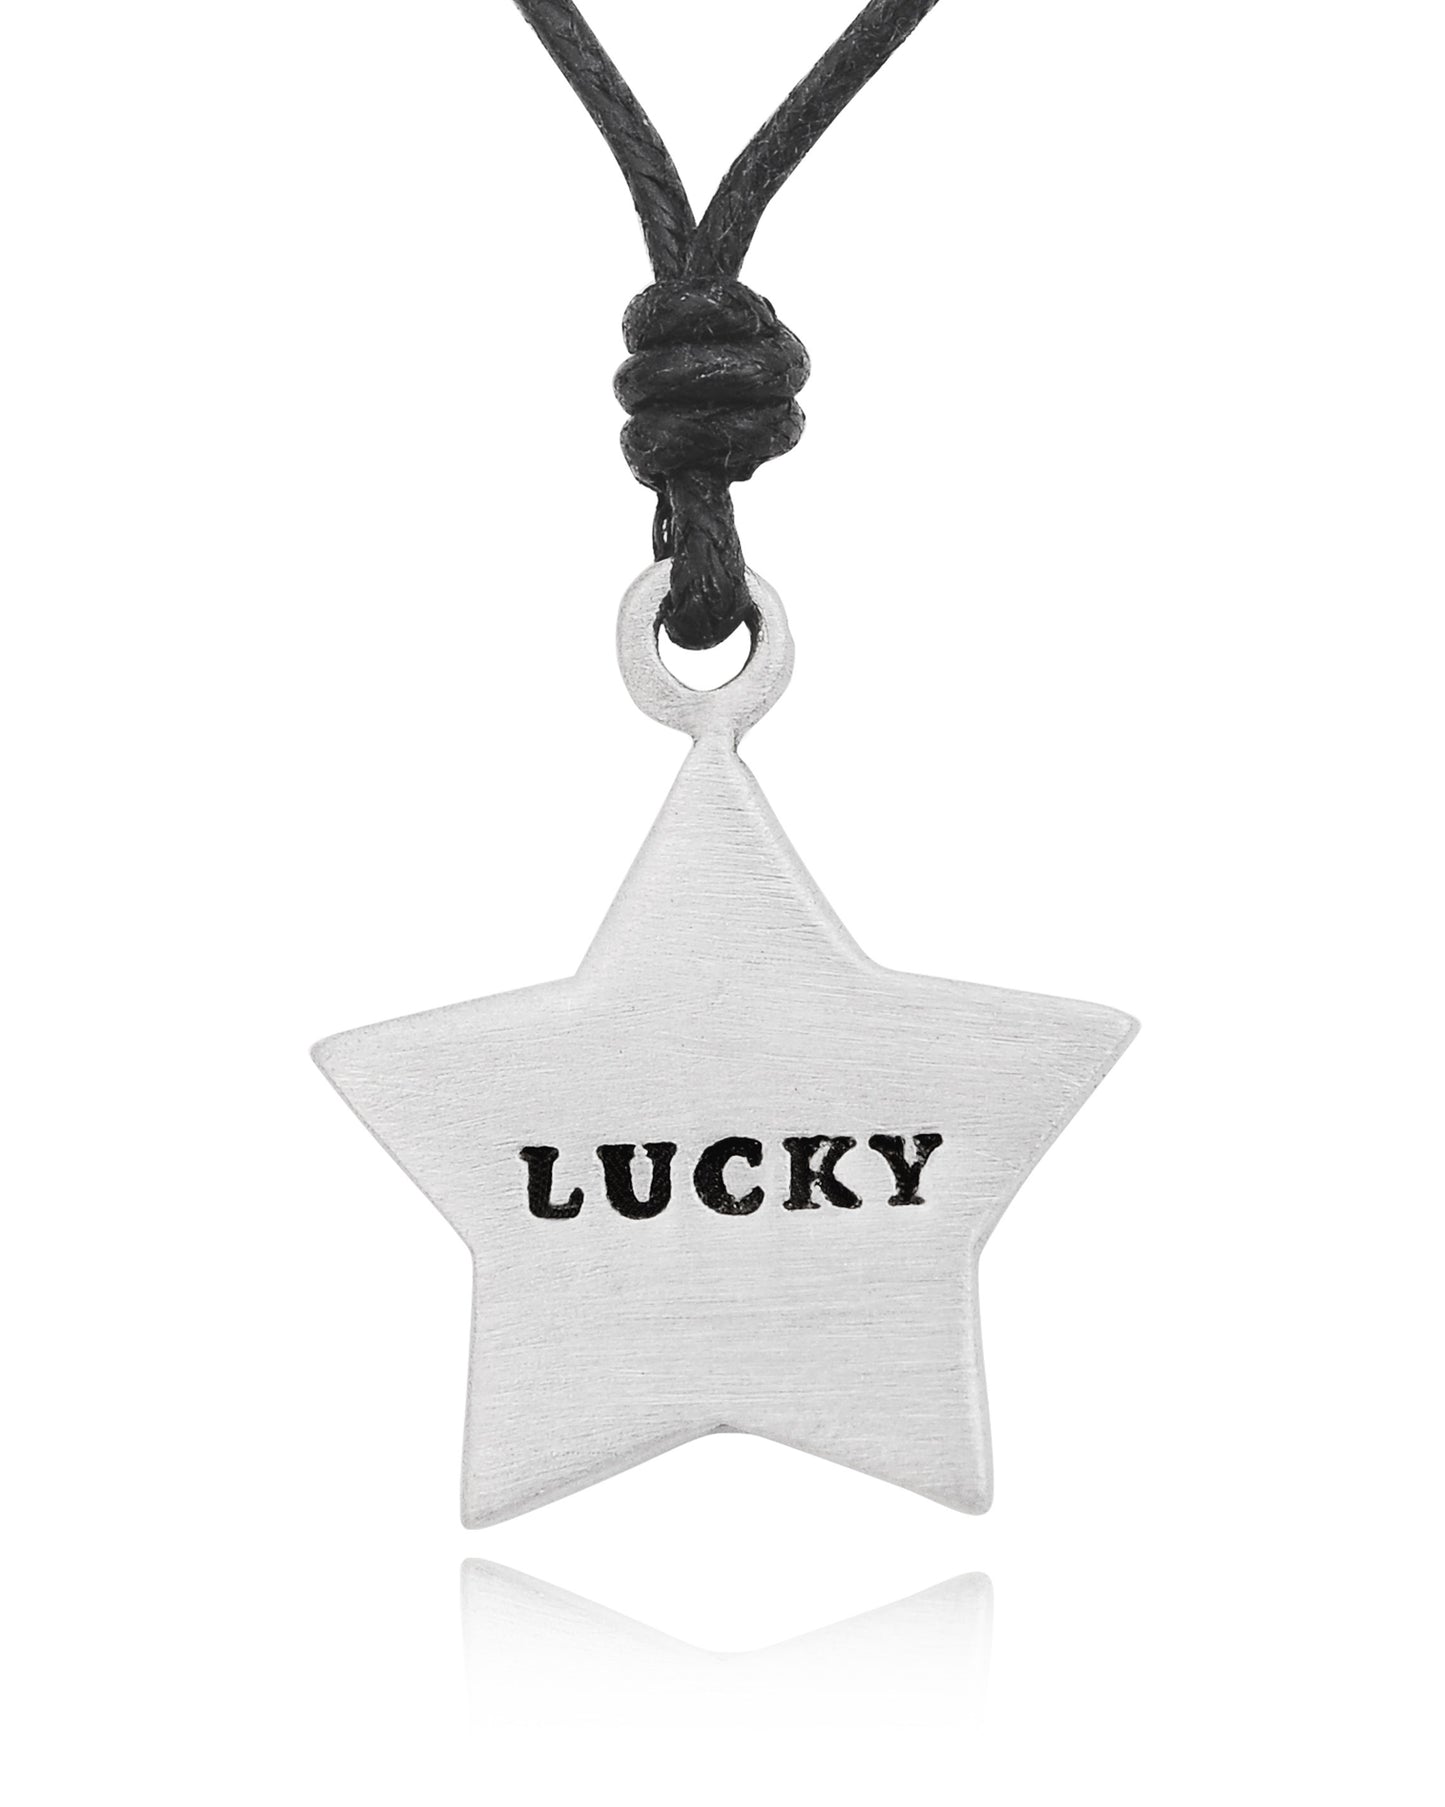 Lucky Star Silver Pewter Charm Necklace Pendant Jewelry